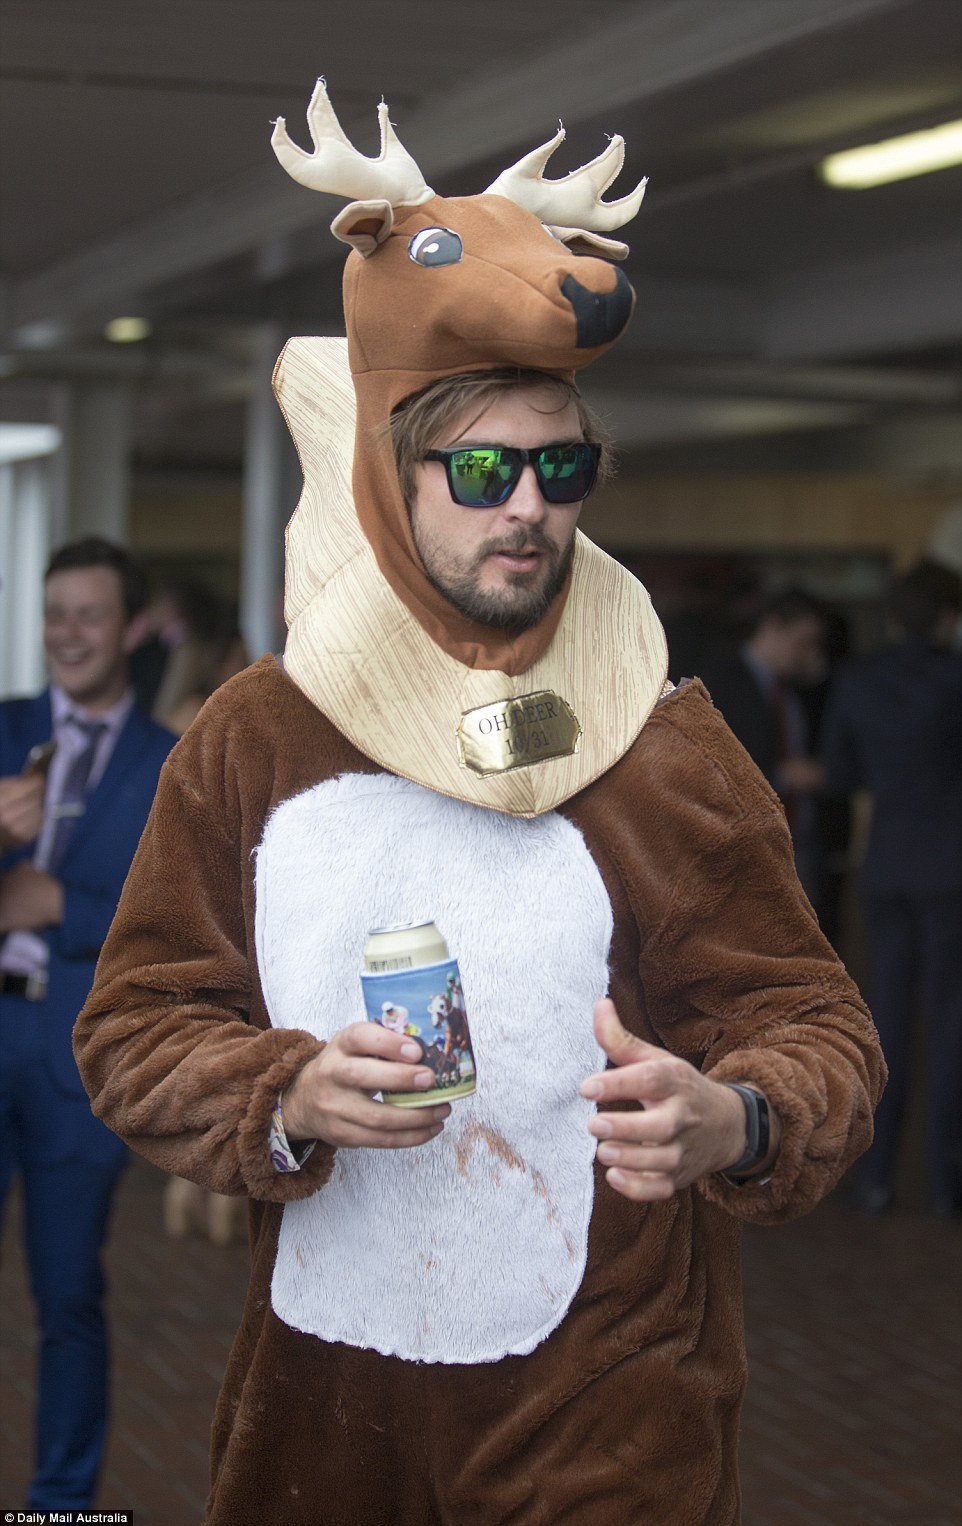 Oh deer! This man dressed up as a deer to celebrate the final day of Melbourne's Cup Spring Racing Carnival